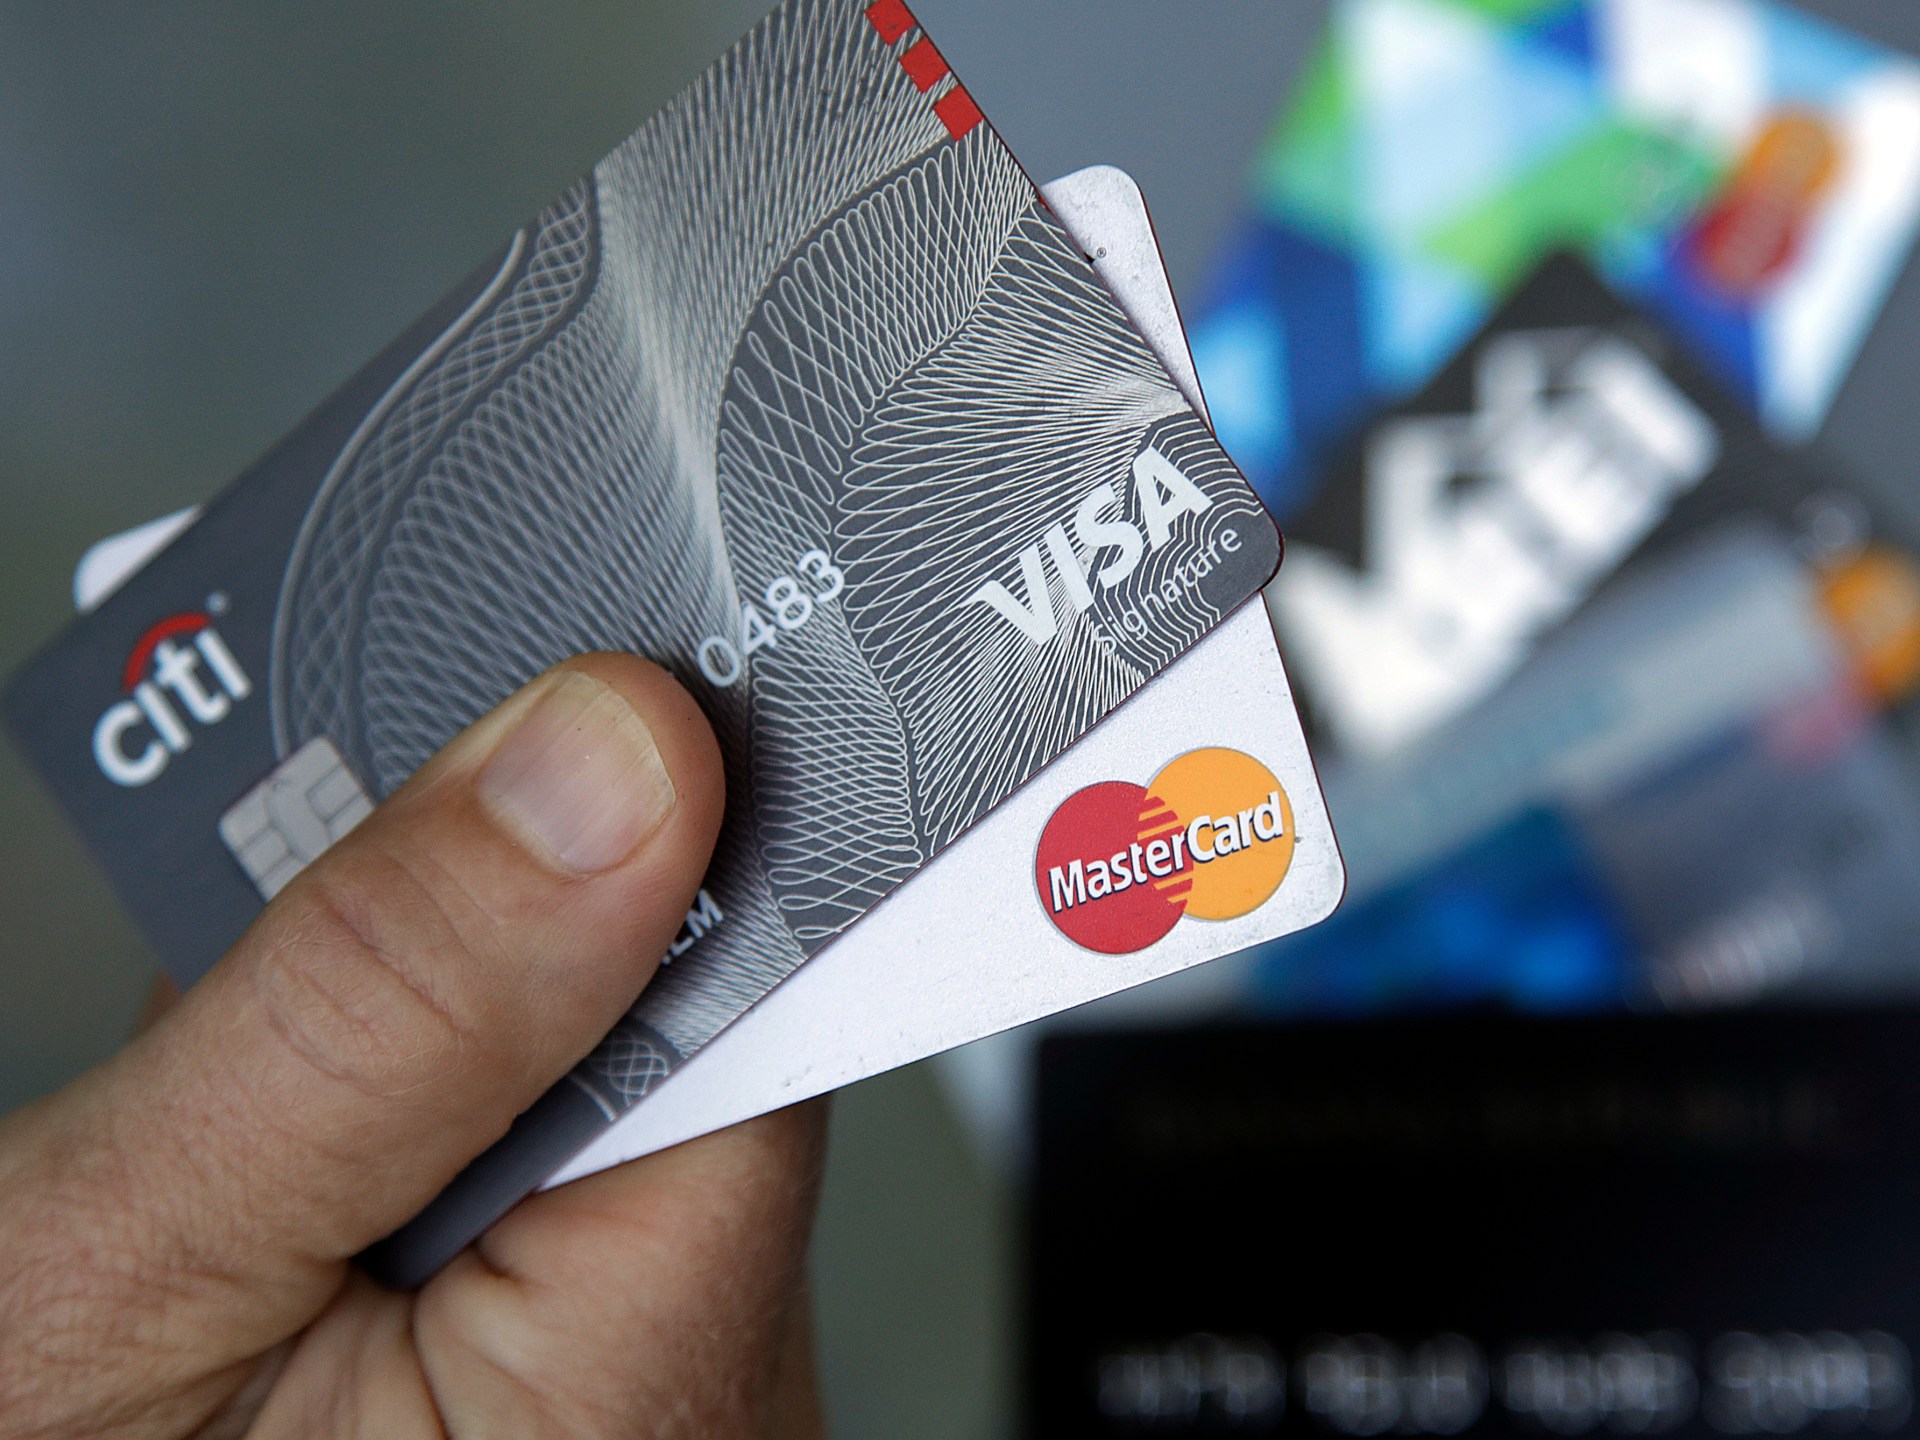 Visa, Mastercard reach $30bn settlement over credit card fees | Business and Economy News